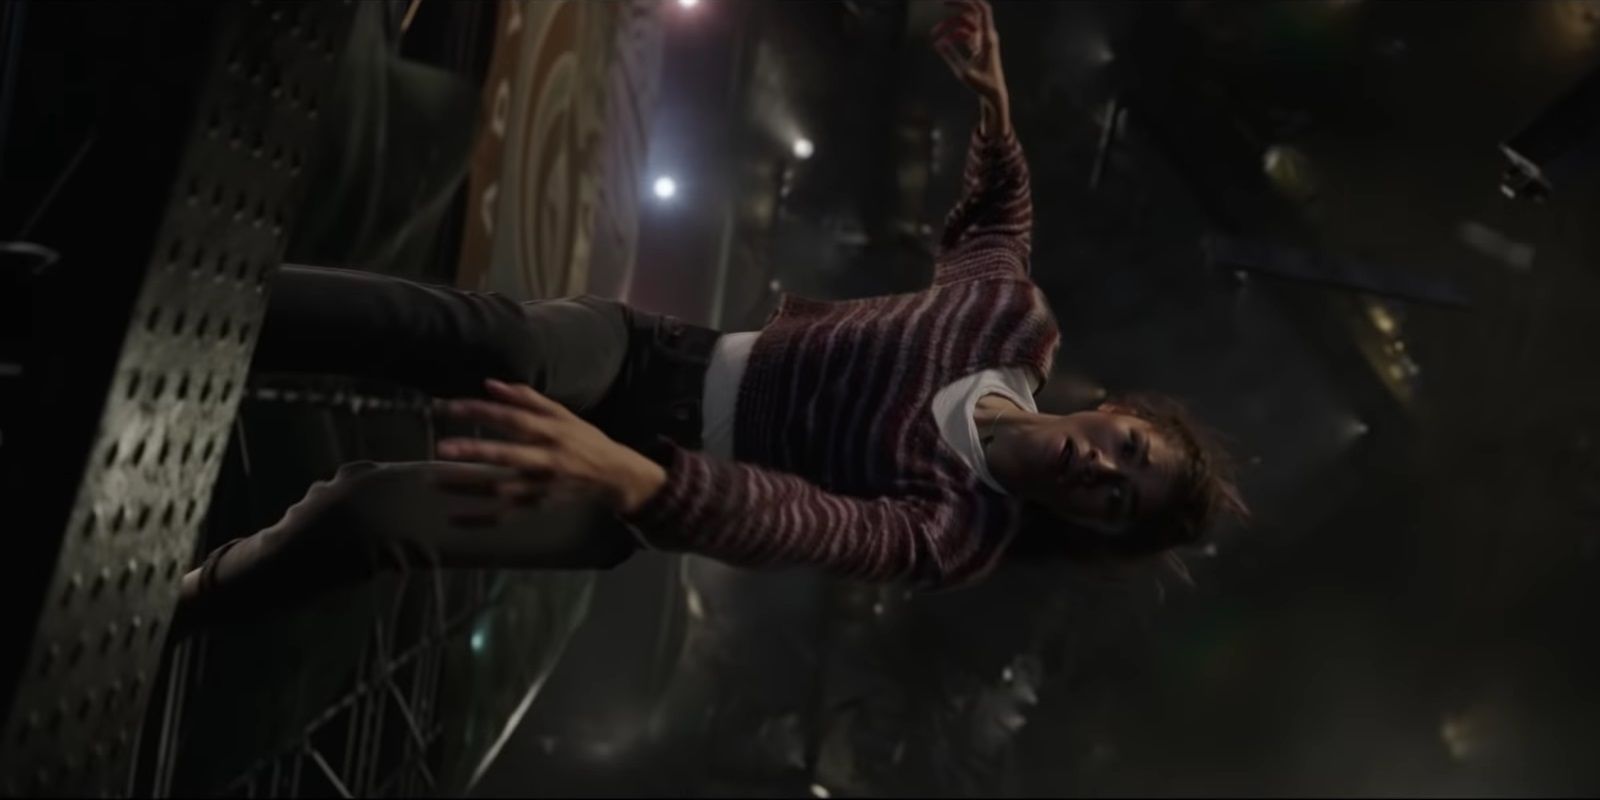 Zendaya as MJ falling from the Statue of Liberty in Spider-Man No Way Home